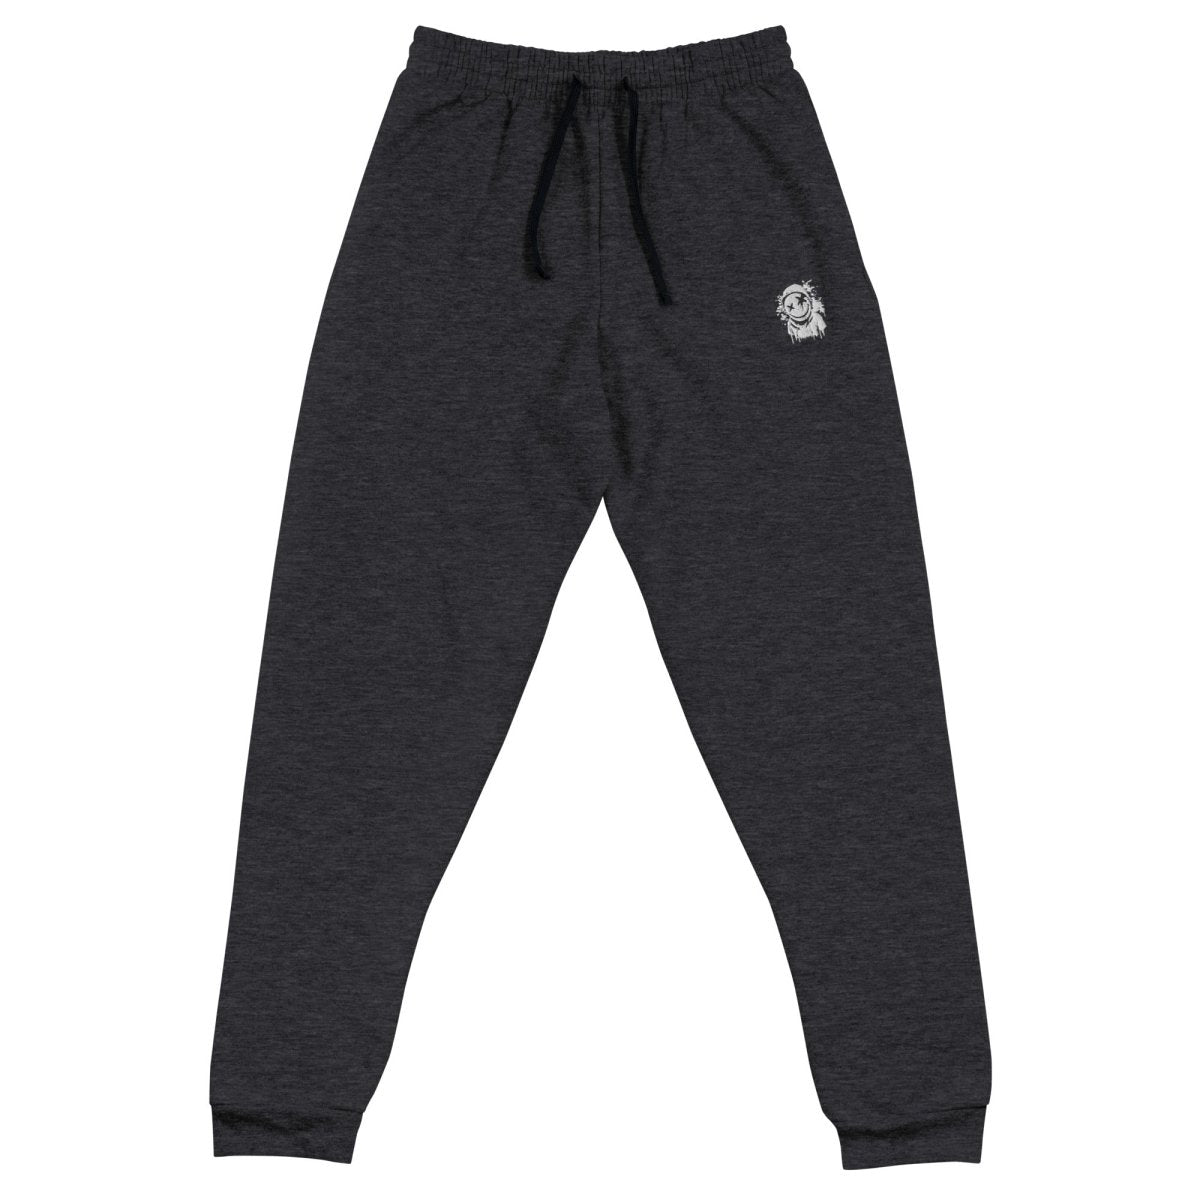 MH Classic Jogger Black Heather - Mainly High